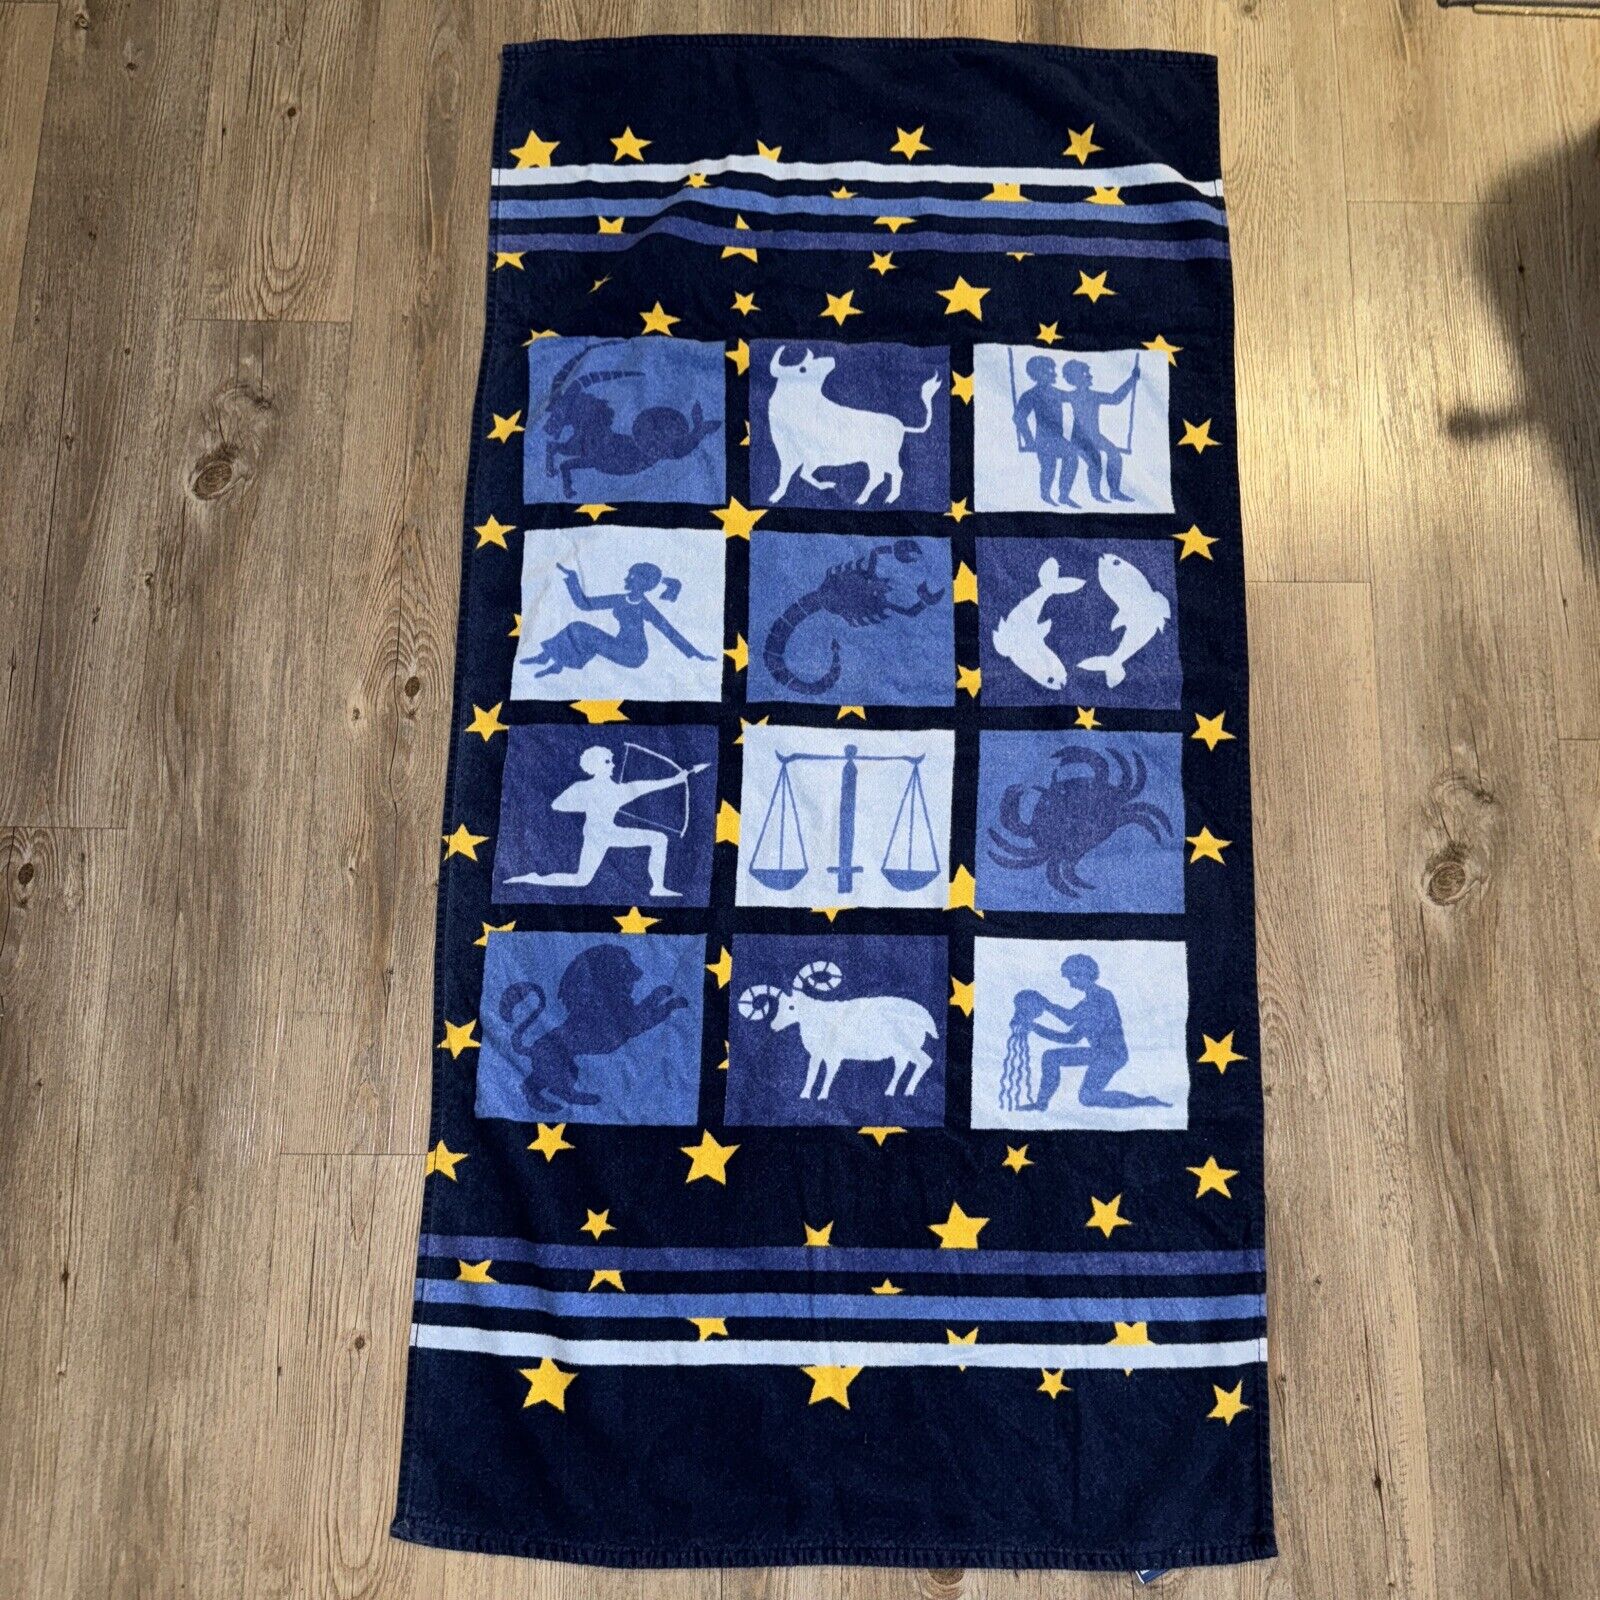 Vintage Zodiac Signs Beach Towel  Astrology Gold Stars Blue 27x52” Jcpenney